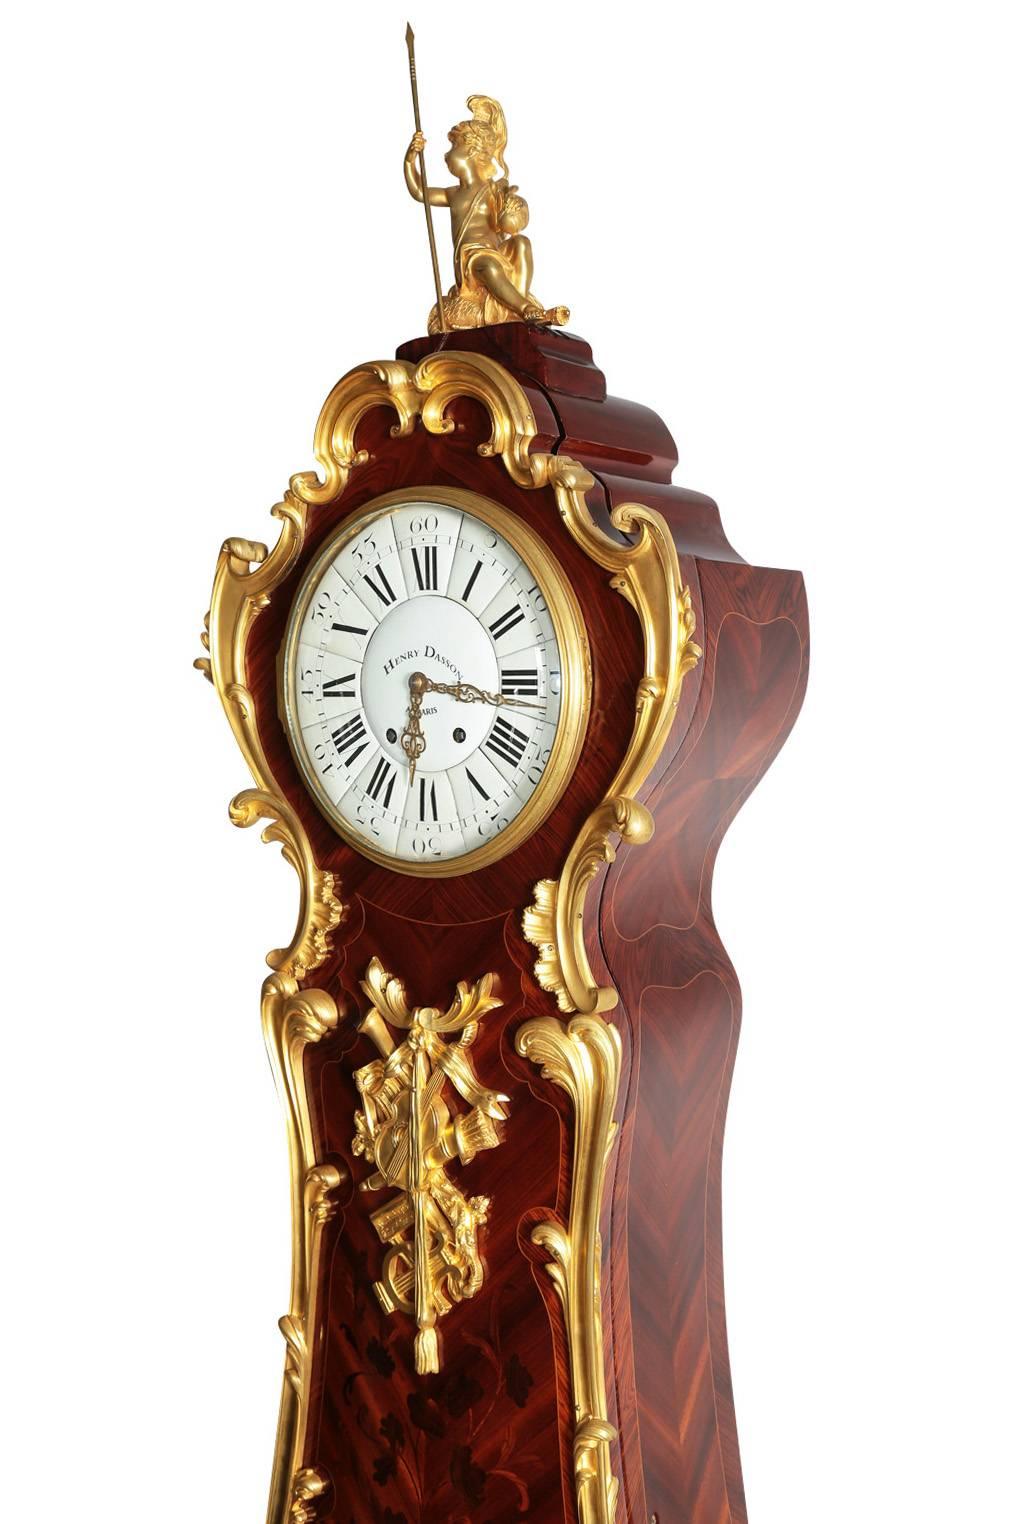 A very fine and palatial French 19th century Regence style figural ormolu-mounted kingwood and tulipwood floral marquetry long-case regulator, after a Model by Charles Cressent (French, 1685-1768). The circular porcelain clock face with Roman